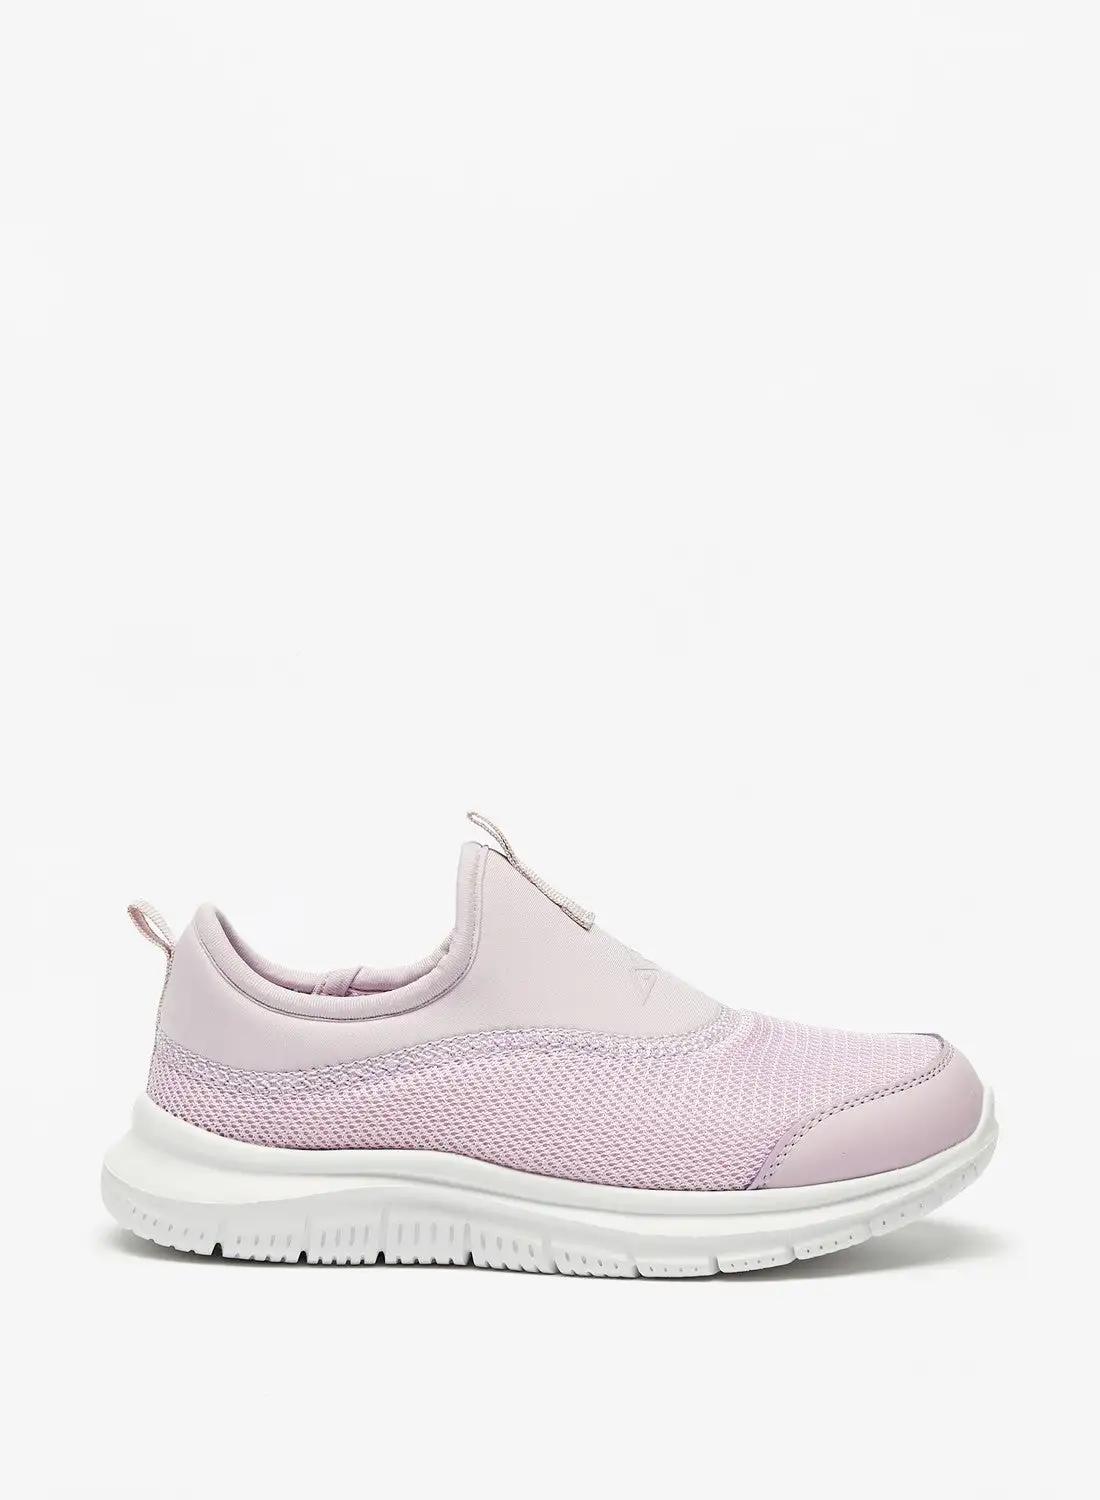 Oaklan by Shoexpress Girls Textured Slip On Sports Shoes with Pull Tabs